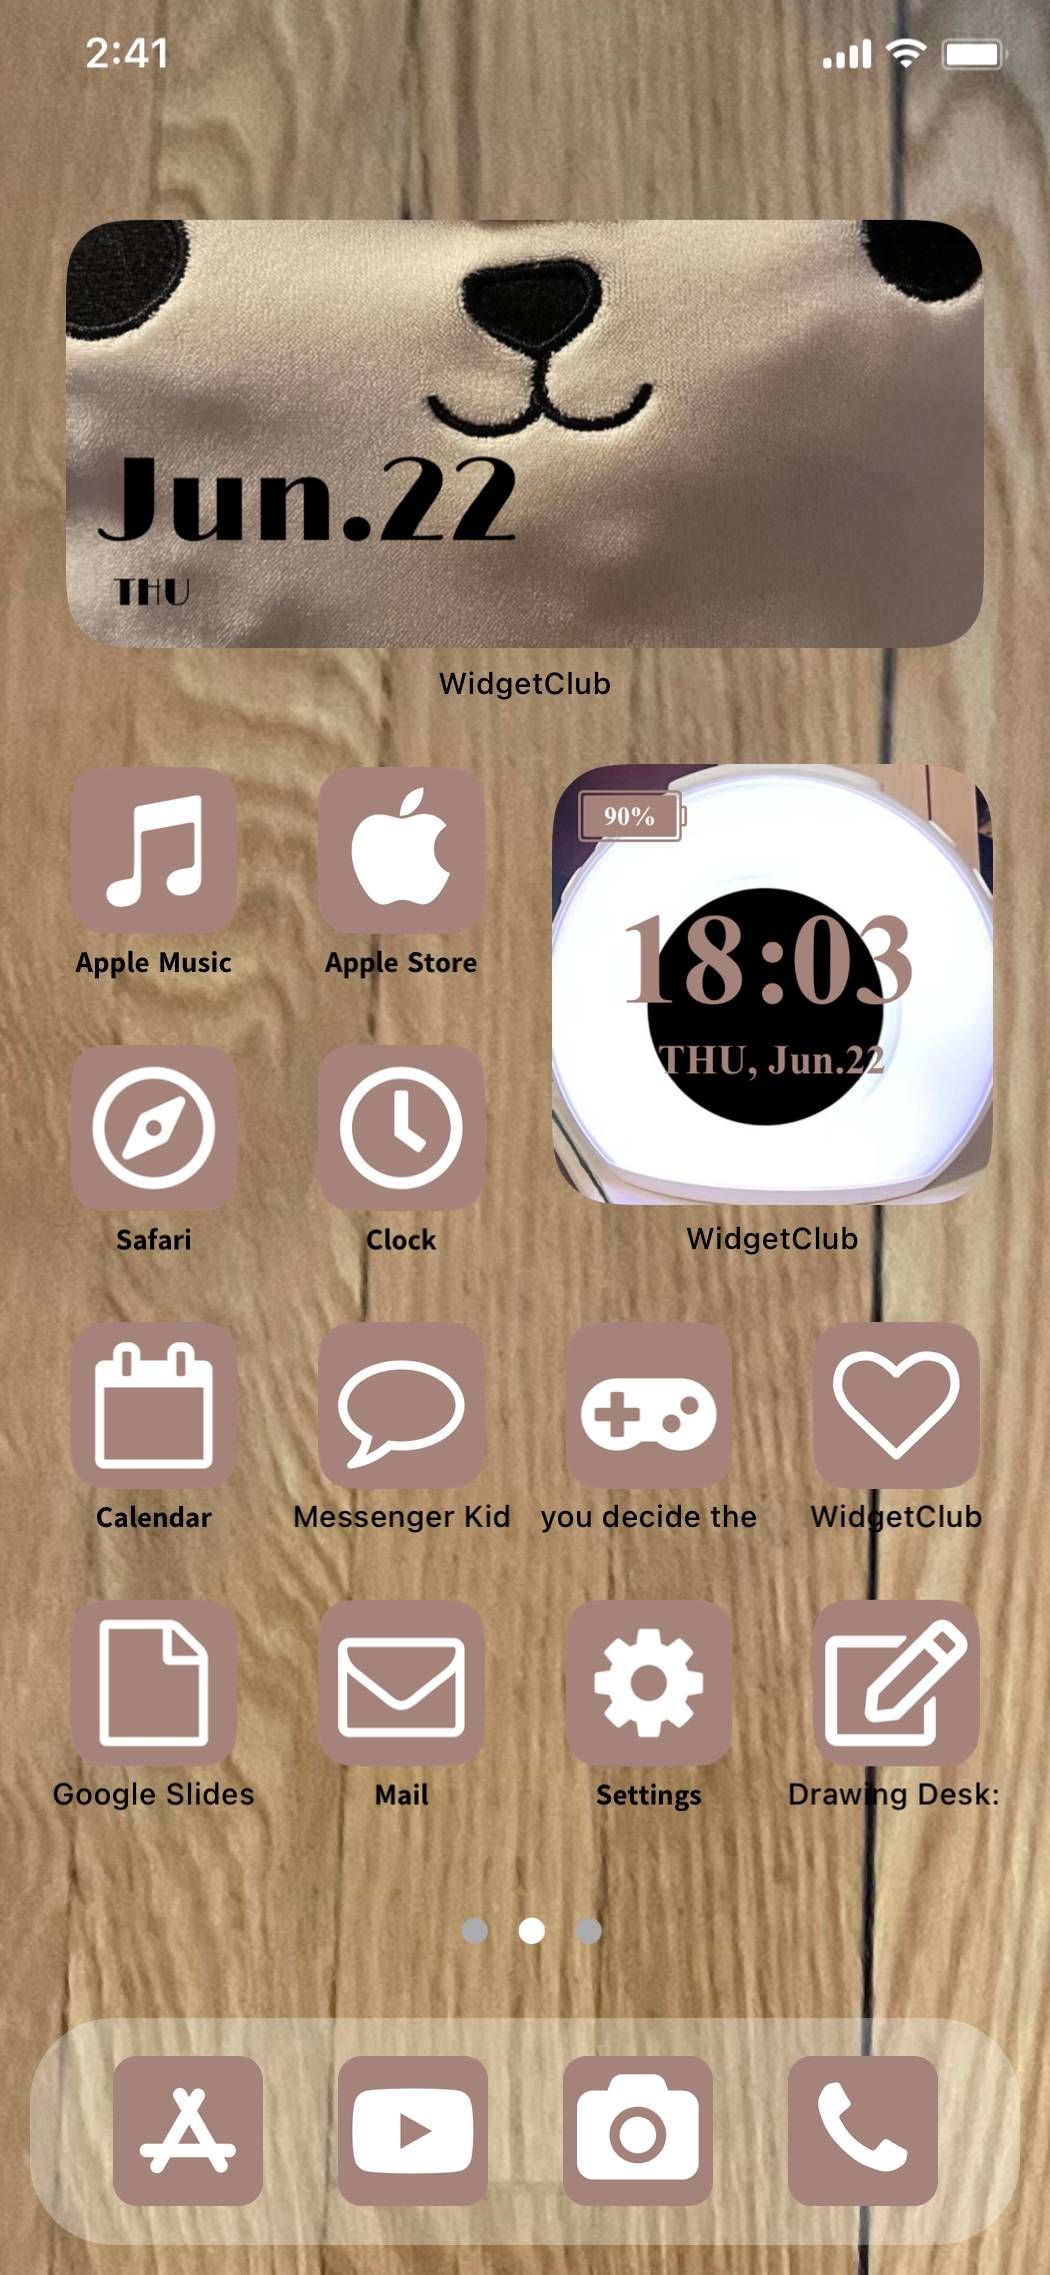 Brown Cozy Phone themeHome Screen ideas[5uv2iDsaUycNtnsMsE6E]